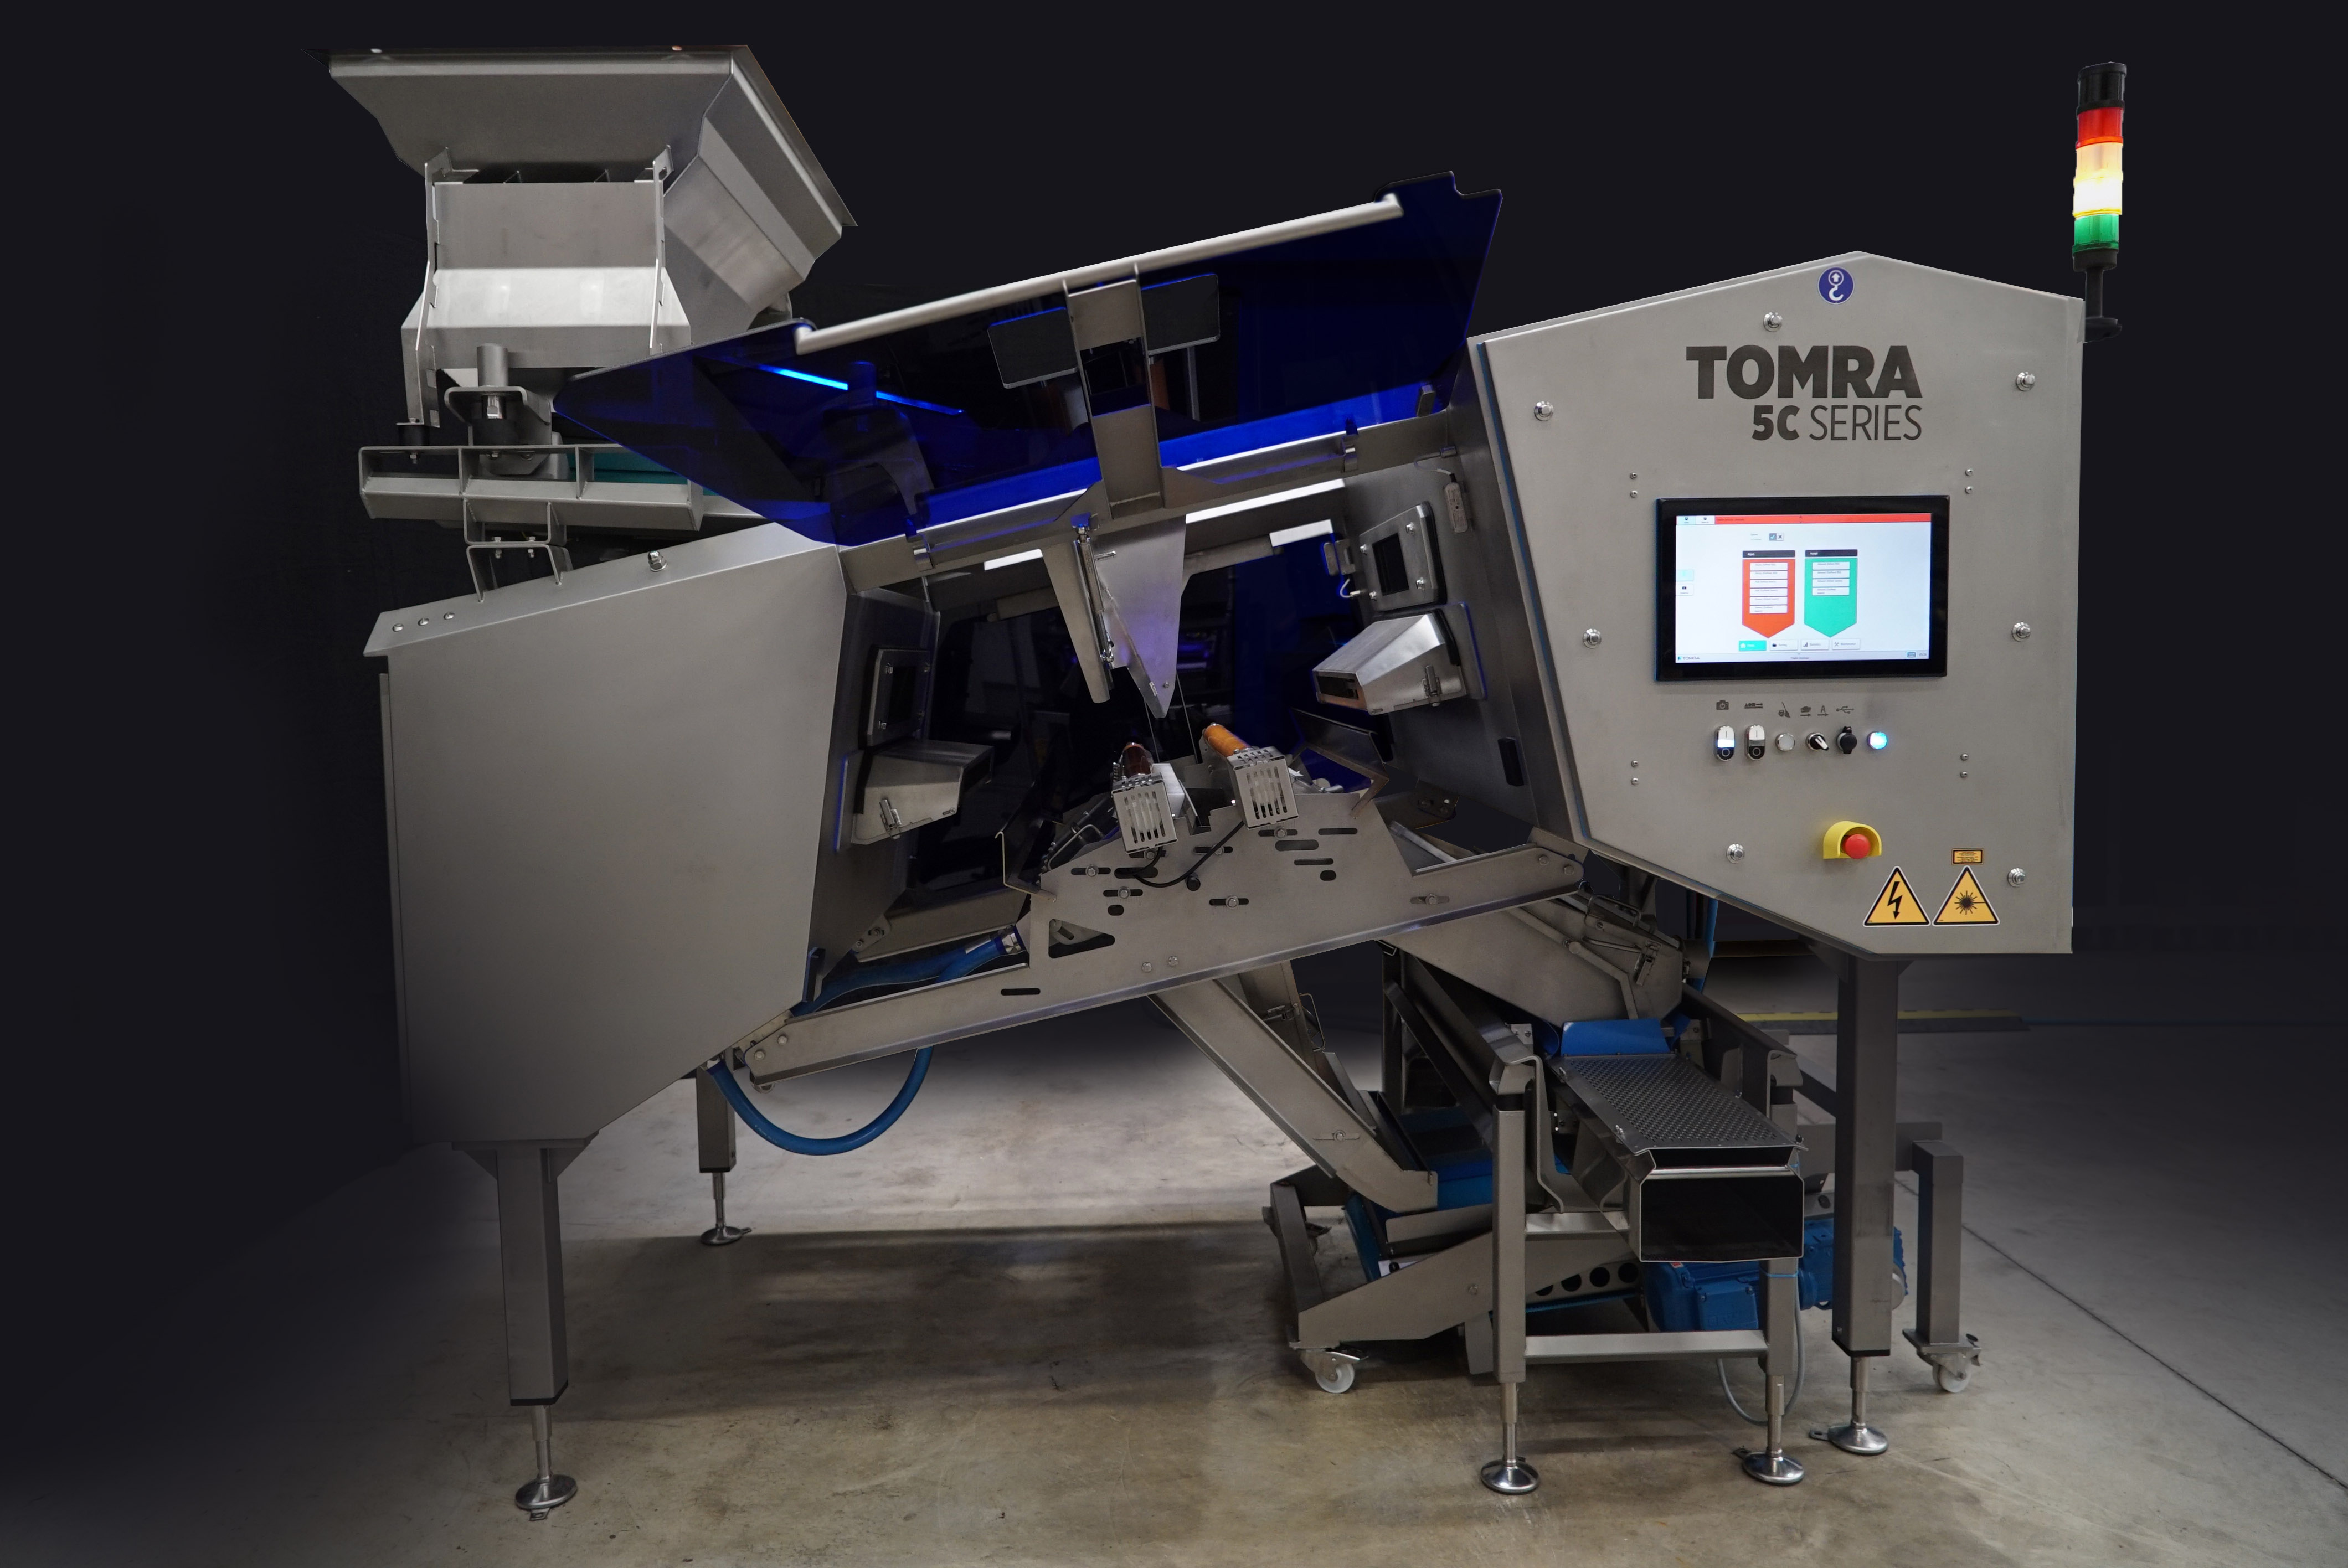 GOLDEN MACADAMIAS, WORLD’S LARGEST MACADAMIA PROCESSOR, ACQUIRES TOMRA Food’S LATEST SORTING TECHNOLOGIES TO FUTURE-PROOF ITS COMPETITIVE ADVANTAGE